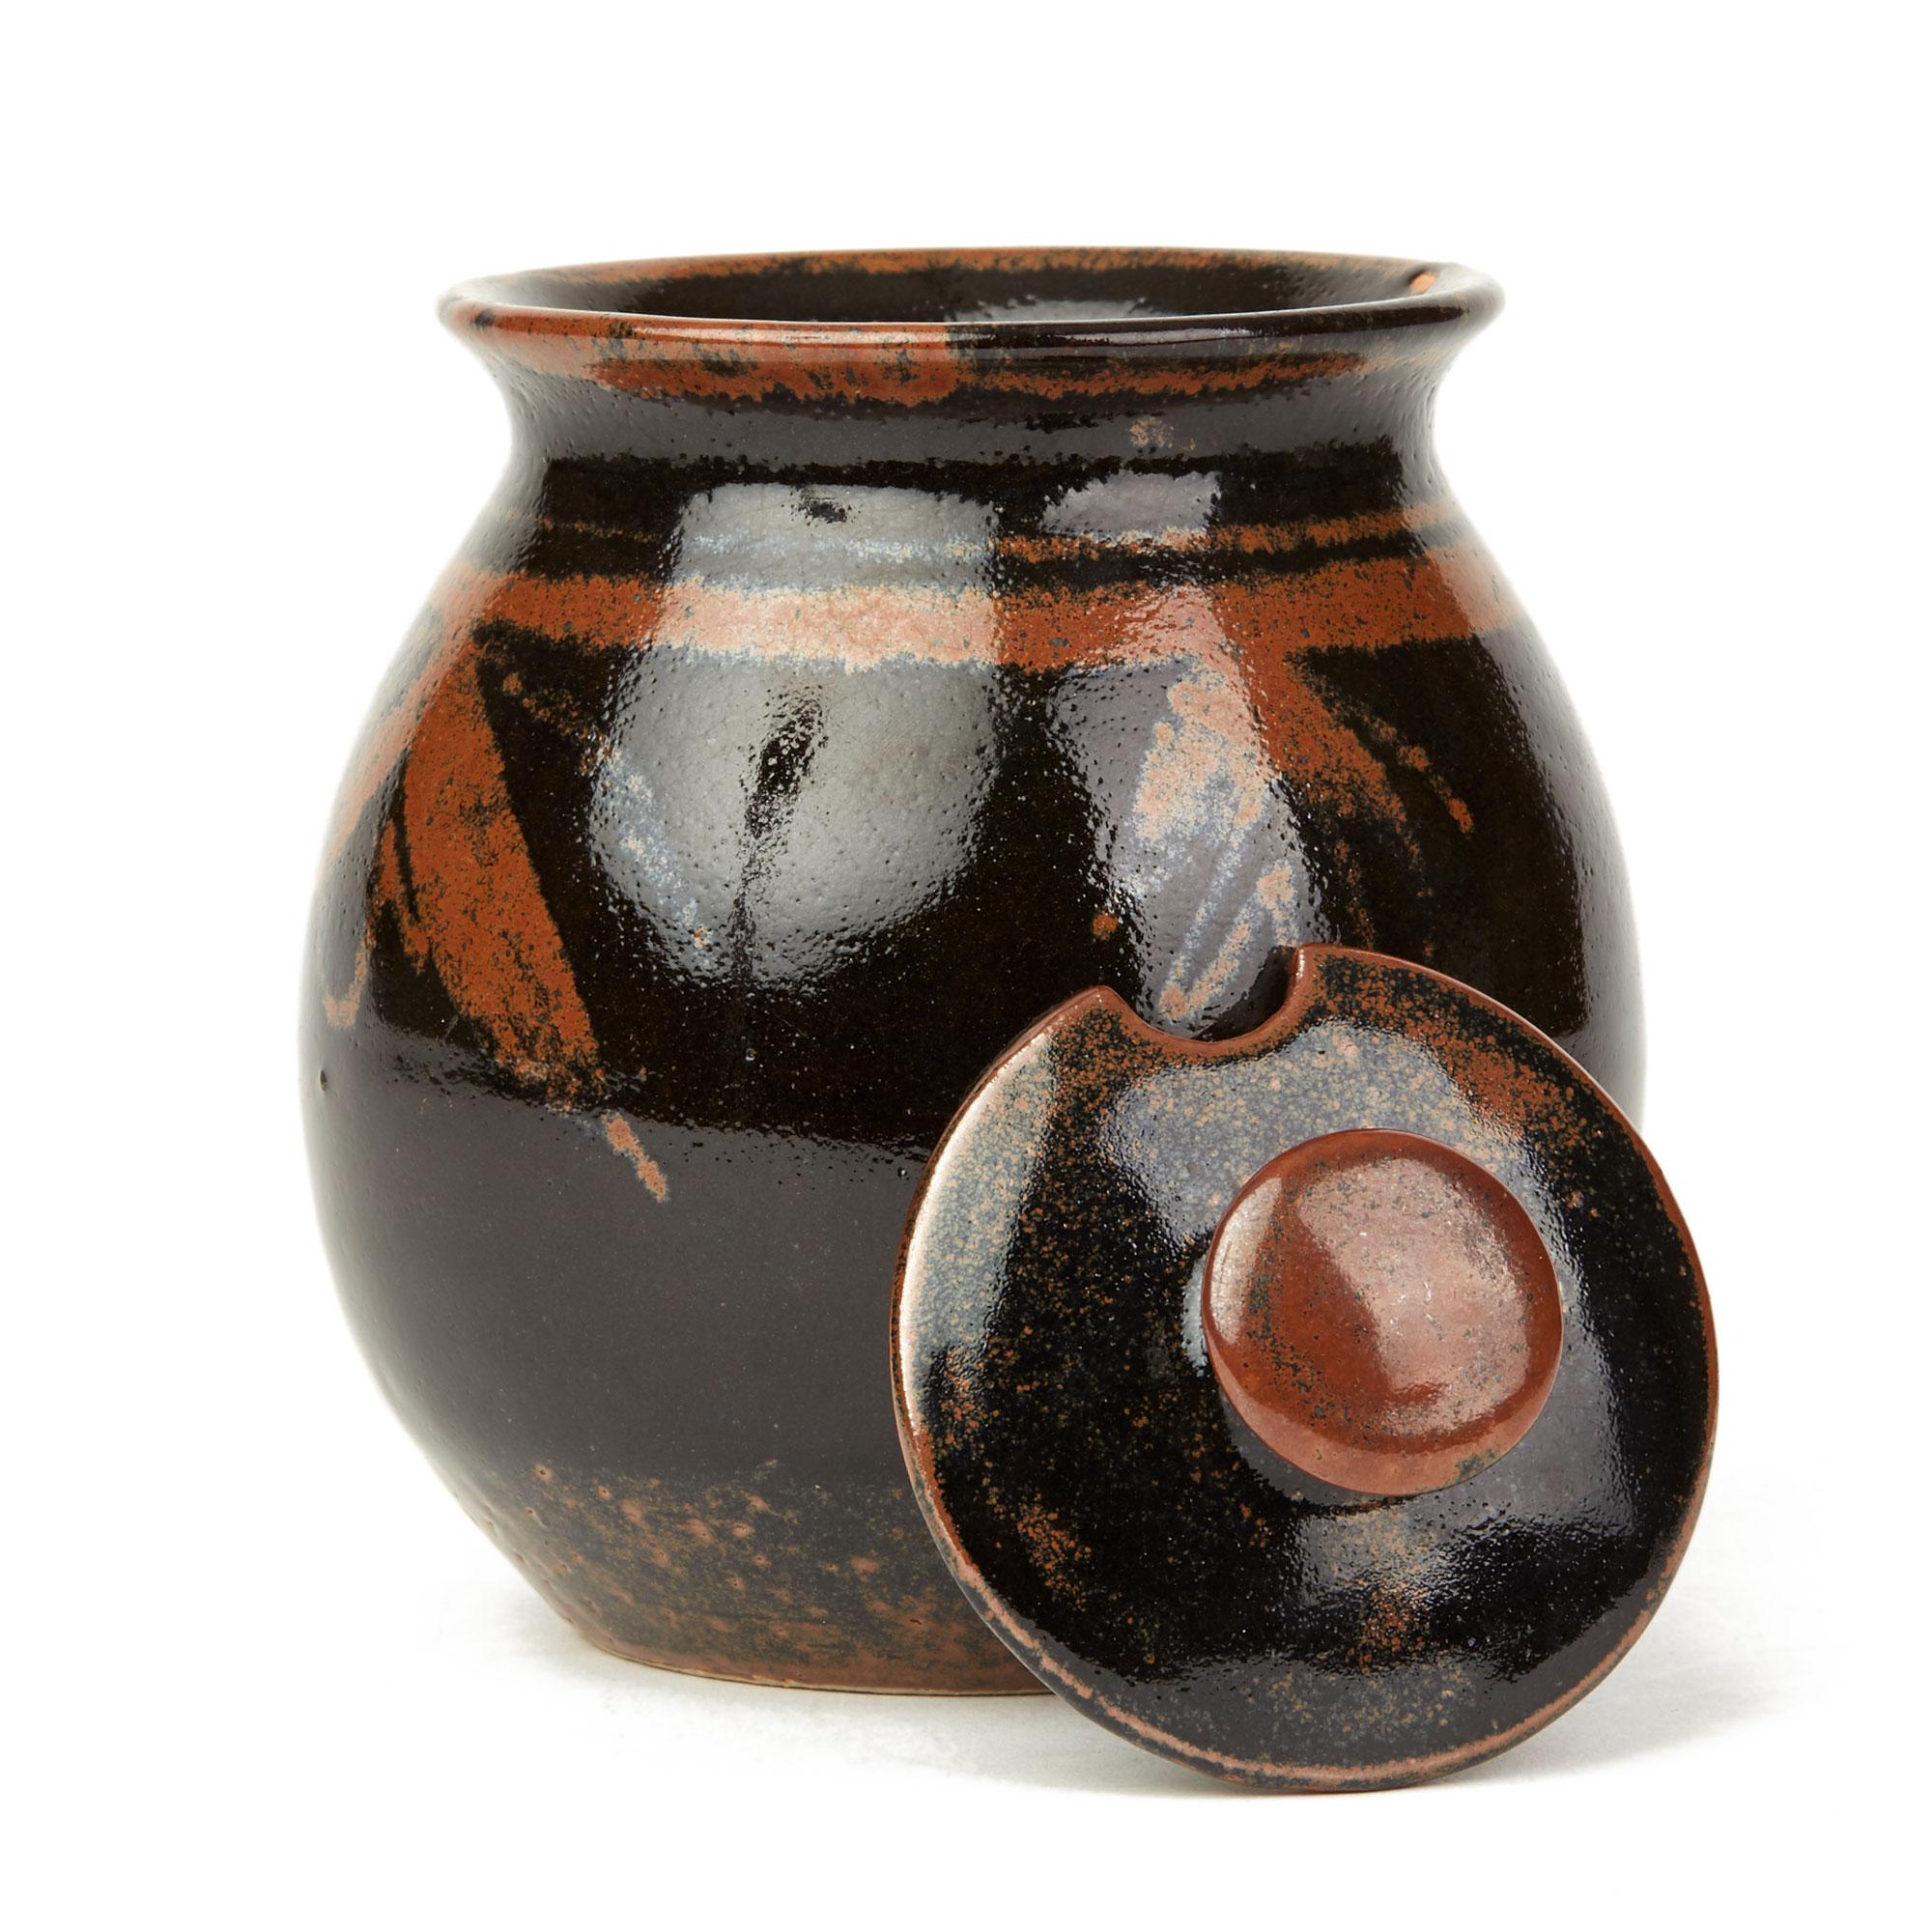 A very finely made studio pottery lidded conserve jar decorated in tenmoku glazes with a ribbon and bow pattern applied around the body of the jar by Scottish based potter David Heminsley (1927-2007). The stoneware jar is of rounded bulbous shape